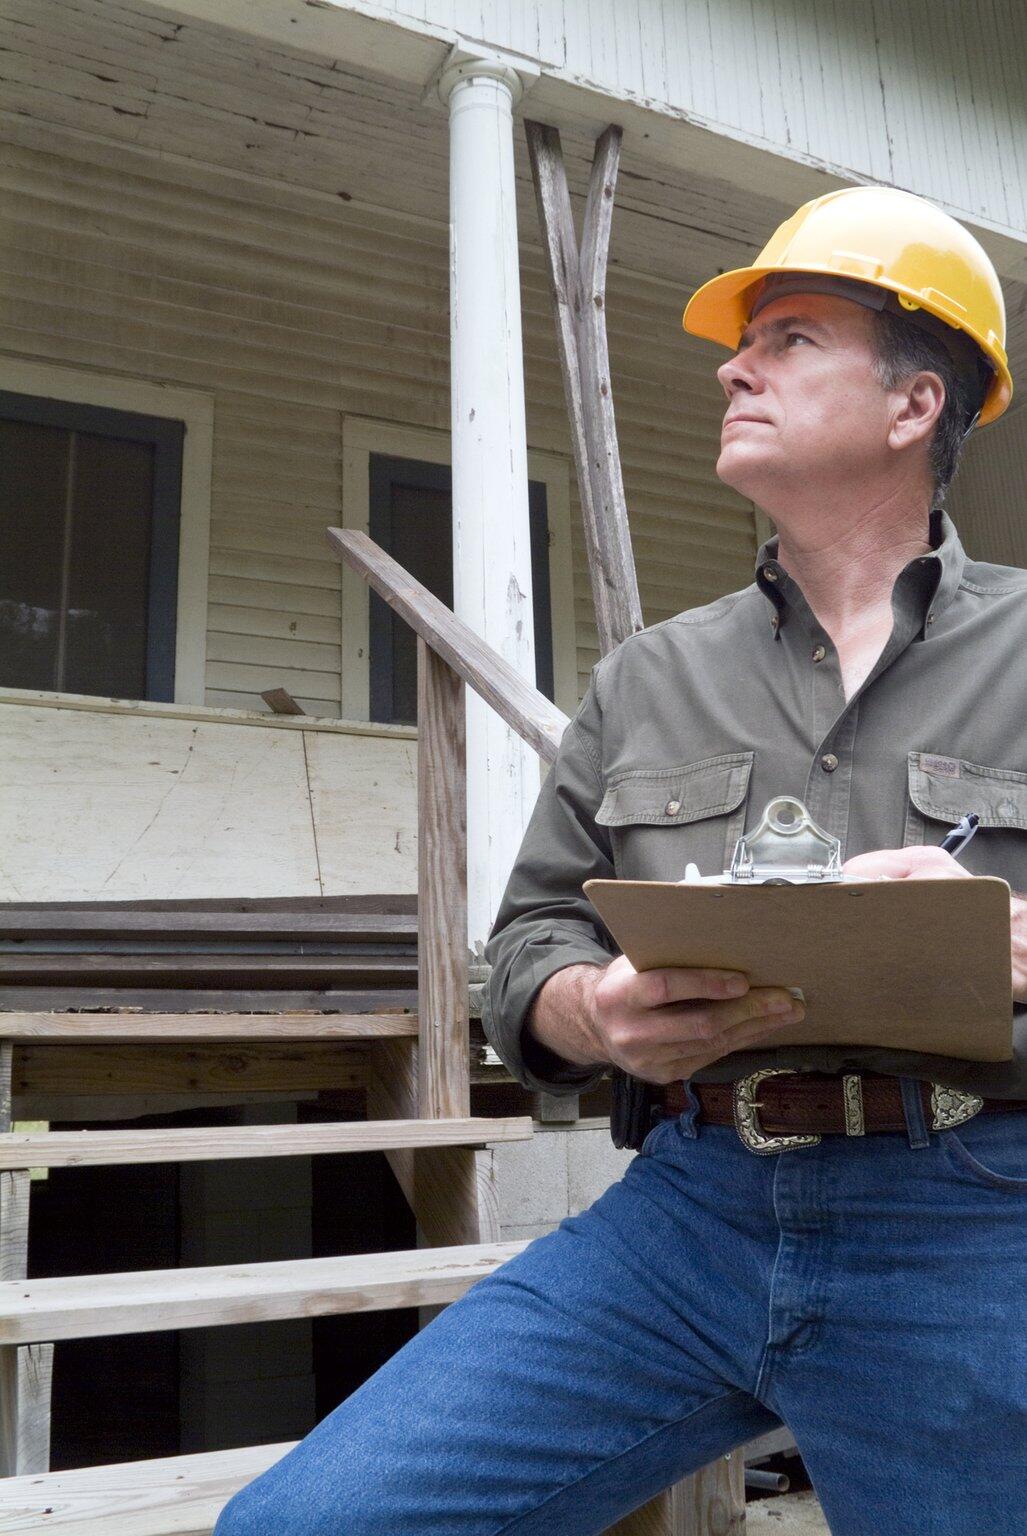 How Often Should a Landlord Inspect Rental Property in Kansas City, MO?